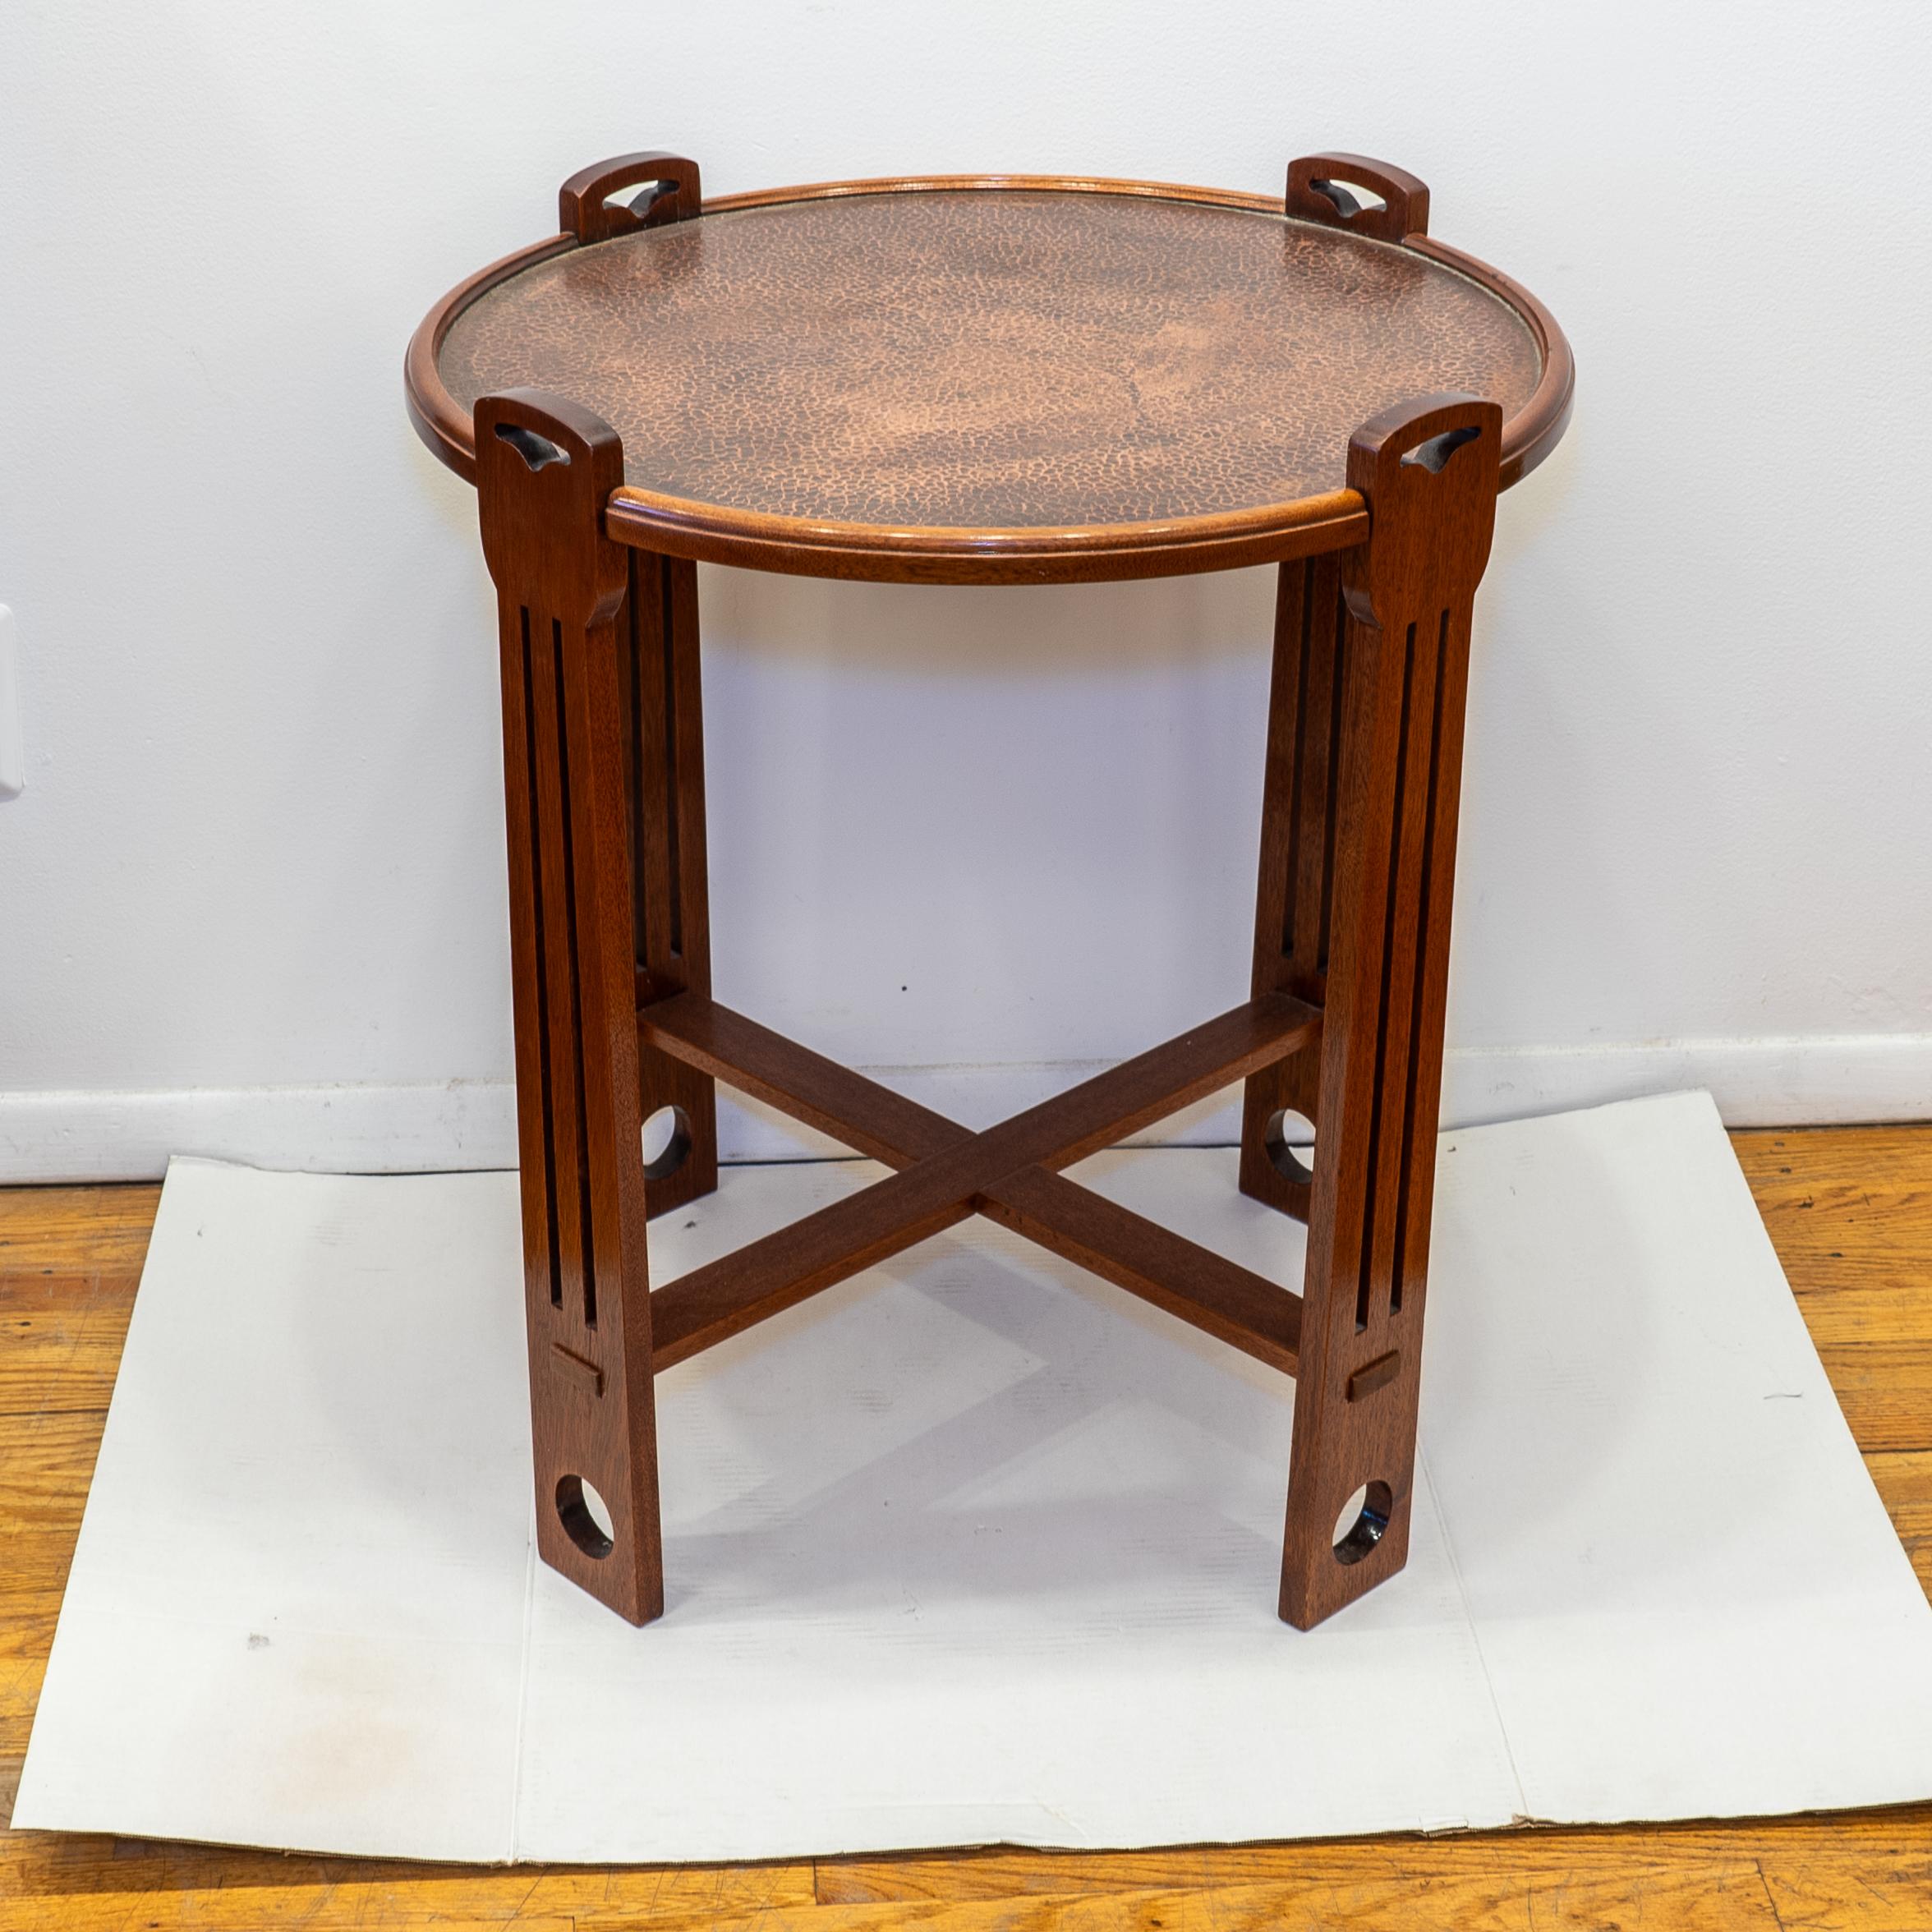 This beautiful table may be used daily, and is solid and durable thanks to its hammered copper surface and solid joinery. Clearly influenced by Charles Rennie Mackintosh, this table produced on the west coast of Sweden shows the cultural connection